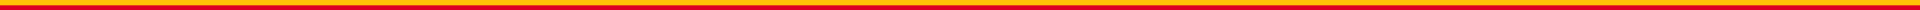 red and yellow line